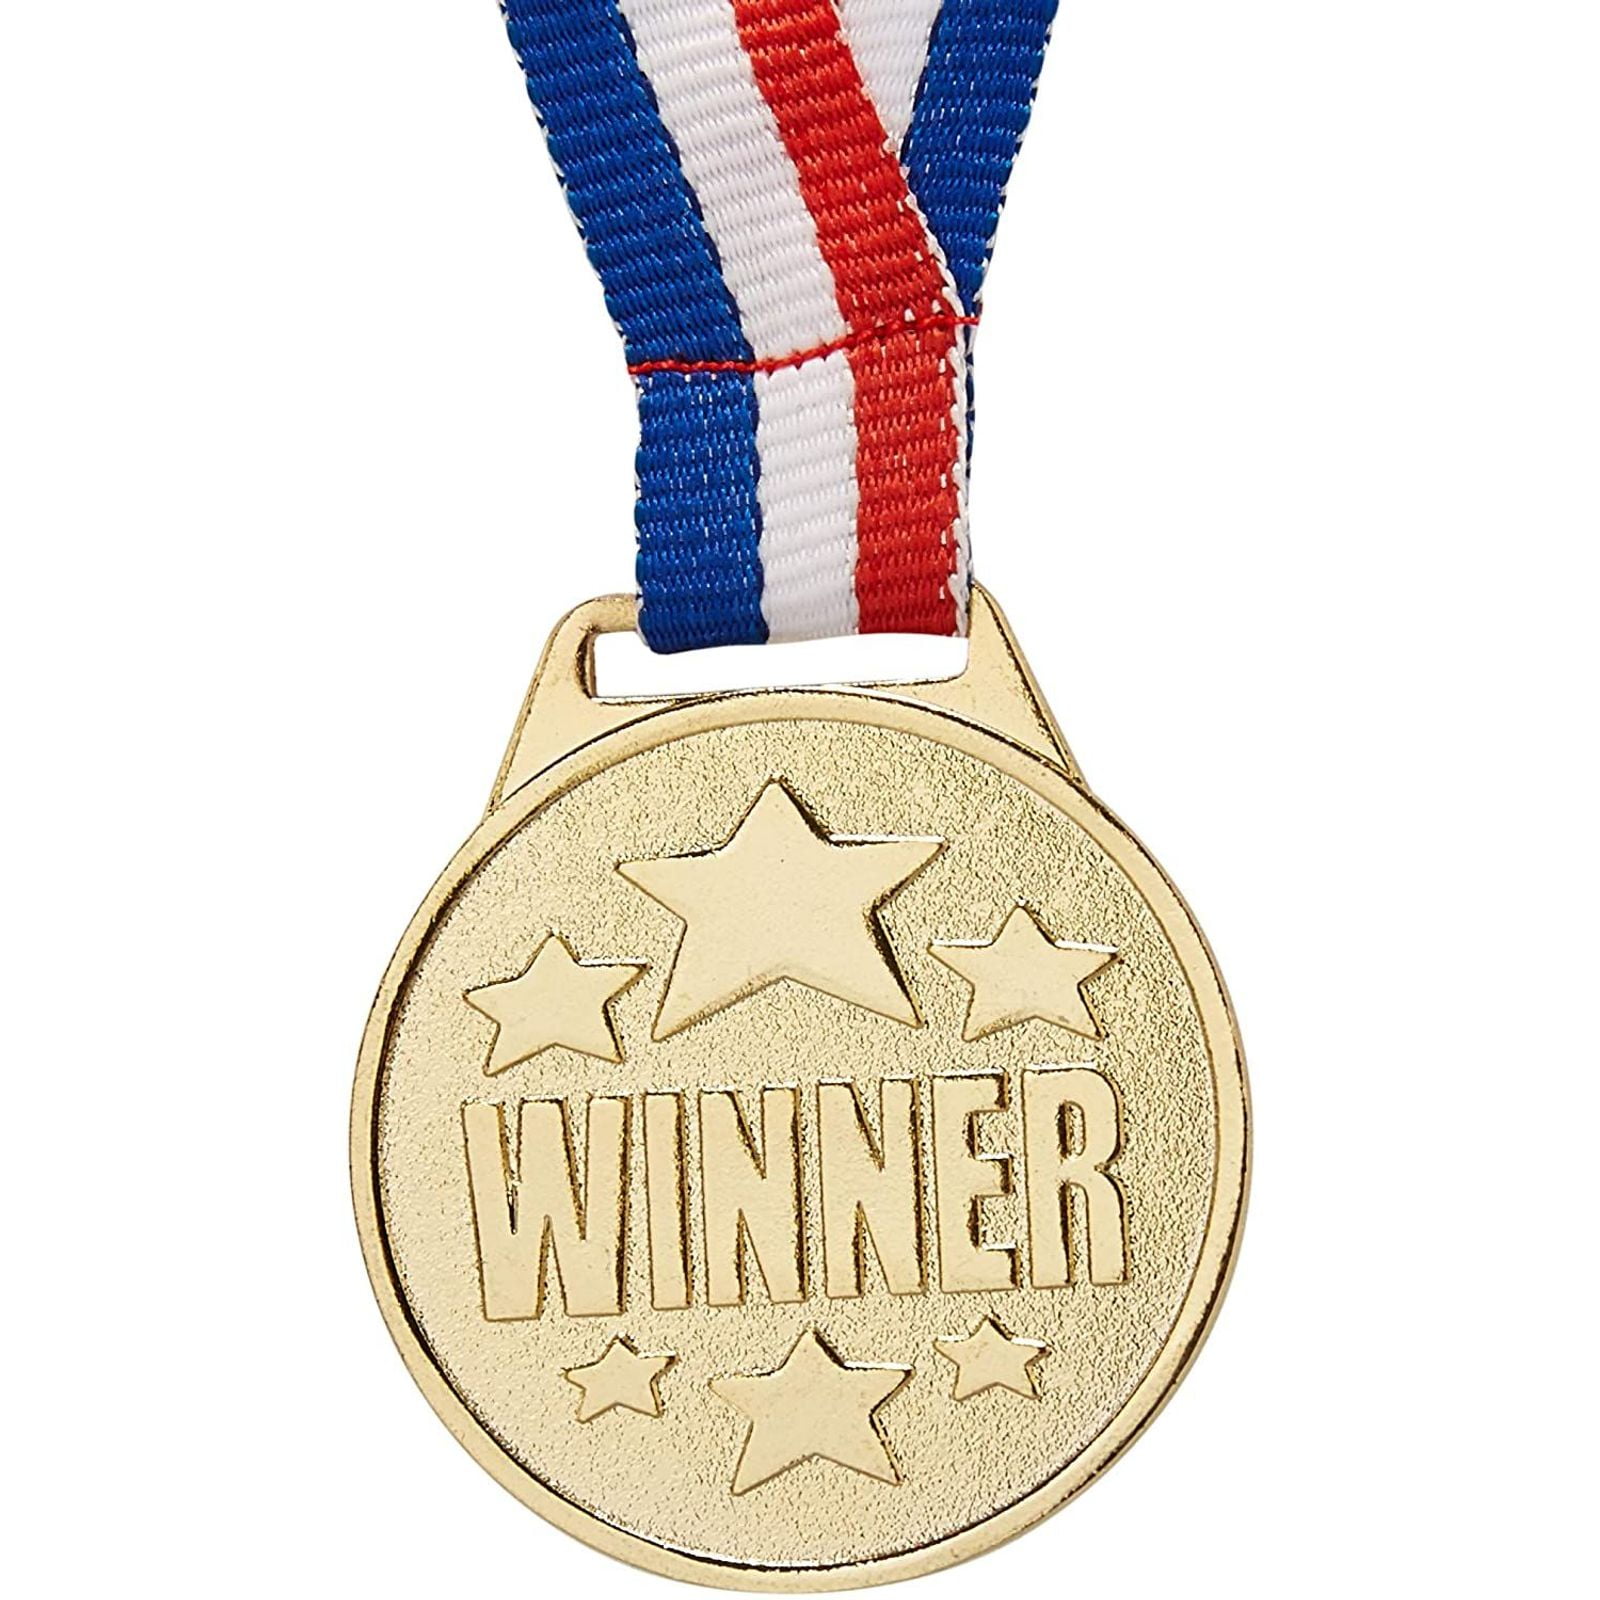 Pack of 10 Silver Volleyball Medals Trophy Champion Participant Award Prize with Neck Ribbons